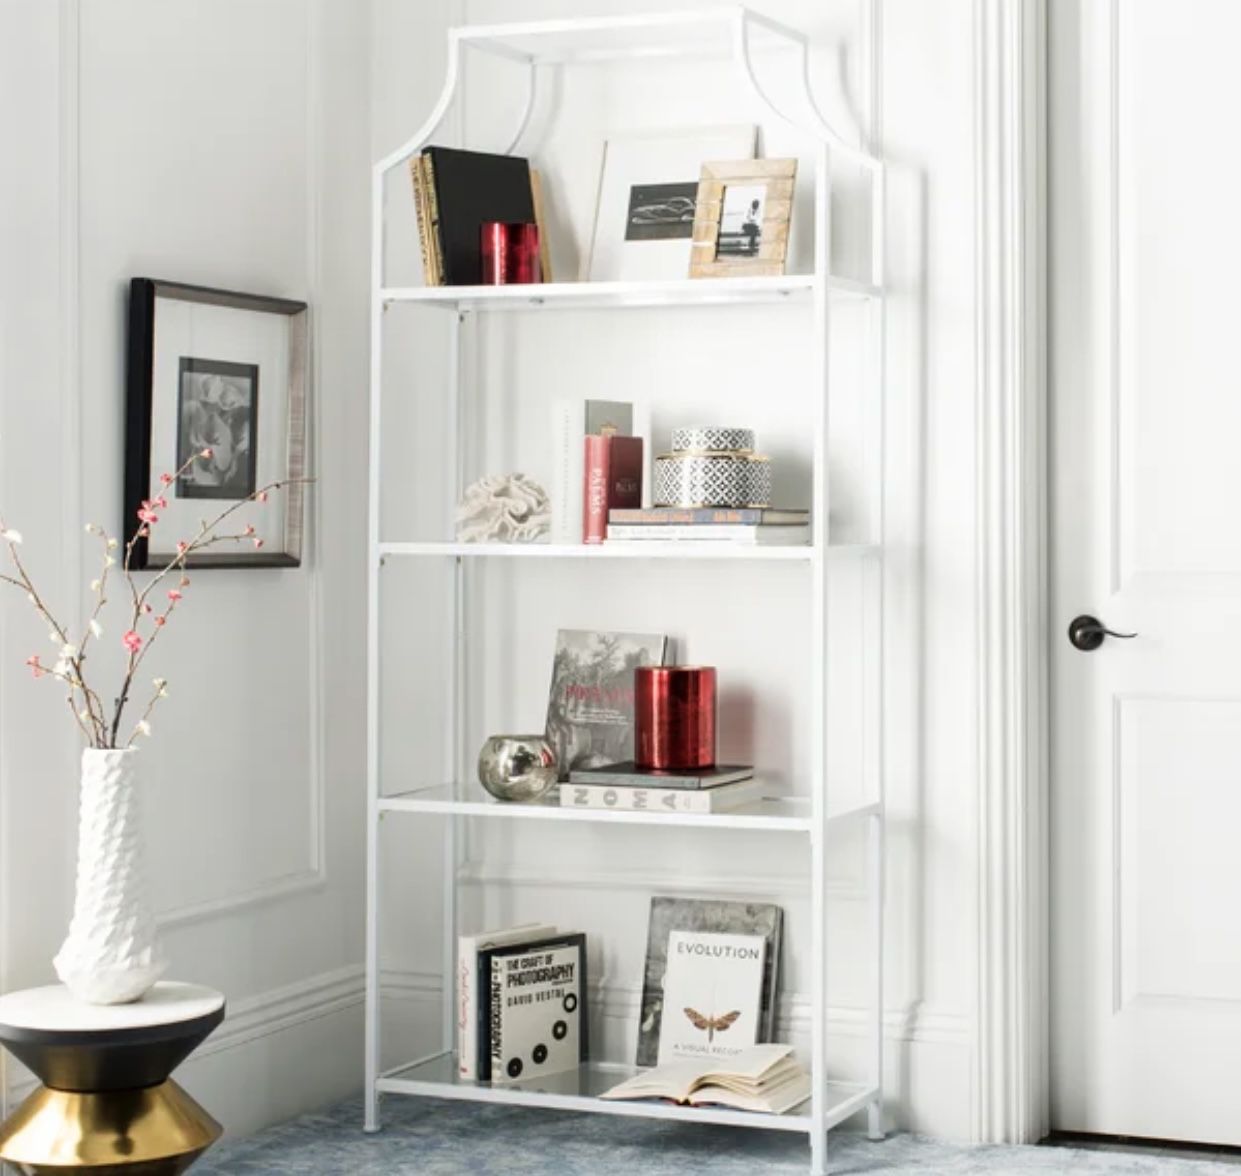 Timblin Etagere Bookcase in white. 80” x 36” x 12”. MSRP $419. Our price $225 + sales tax  